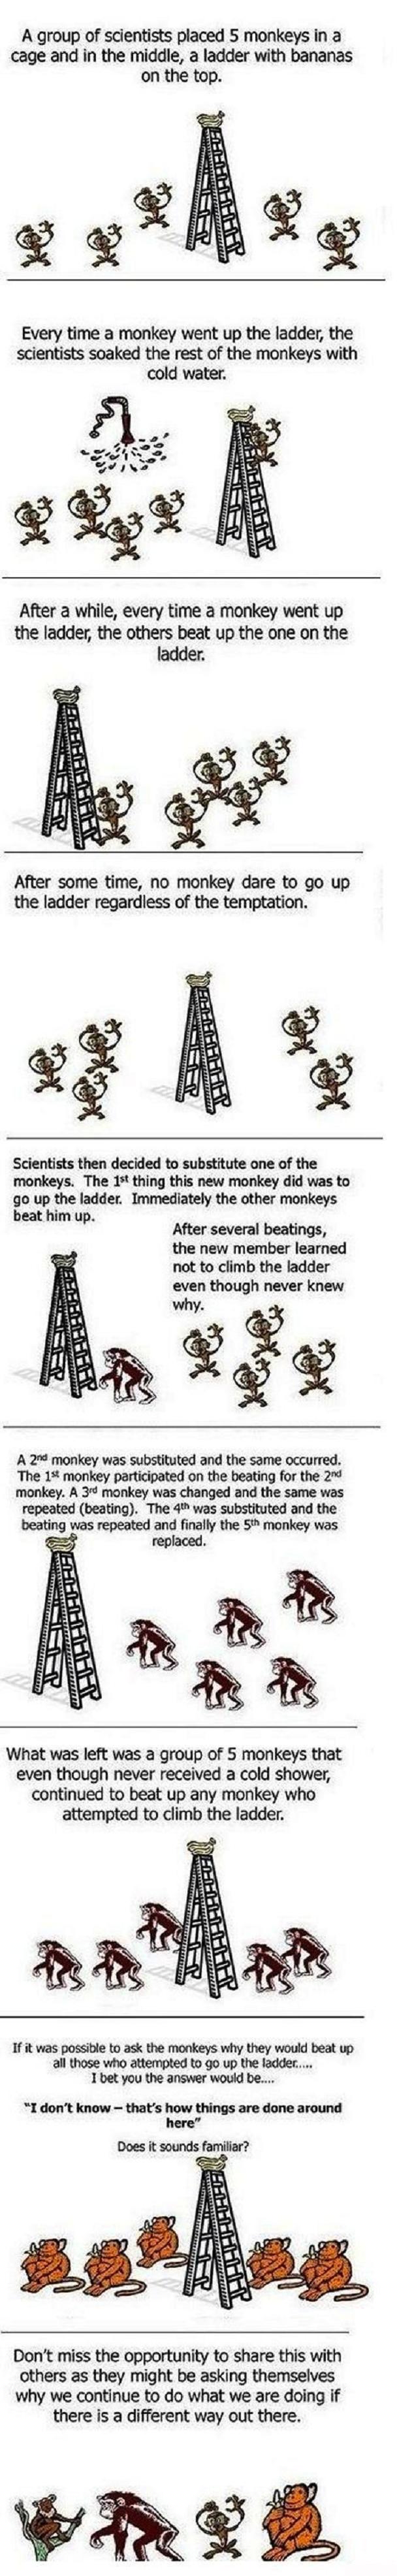 monkeys-bananas-step-ladders-and-water-sprays-experiment-comic-strip